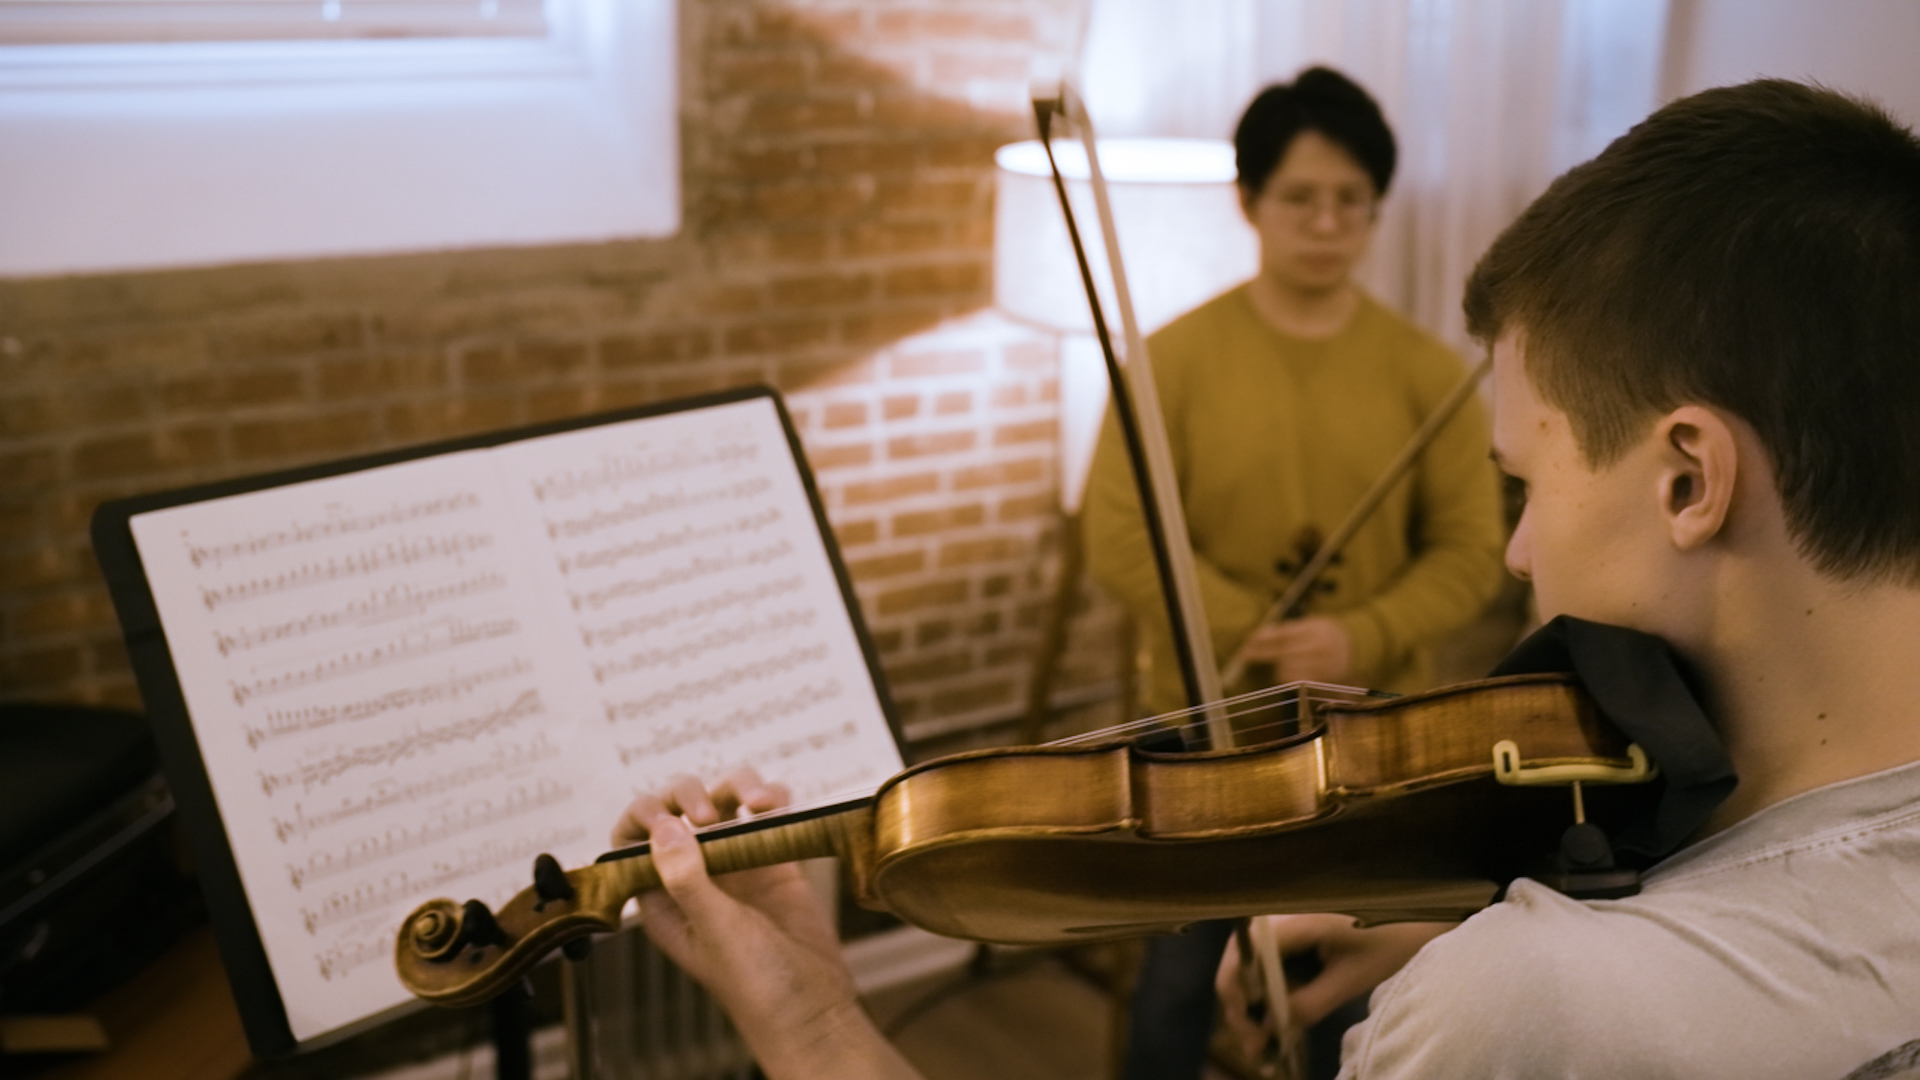 Braden Riley works under the tutelage of Michael Chu, principal second violinist for the Evansville Philharmonic Orchestra. (Tim Jagielo / WNIN Video Still)